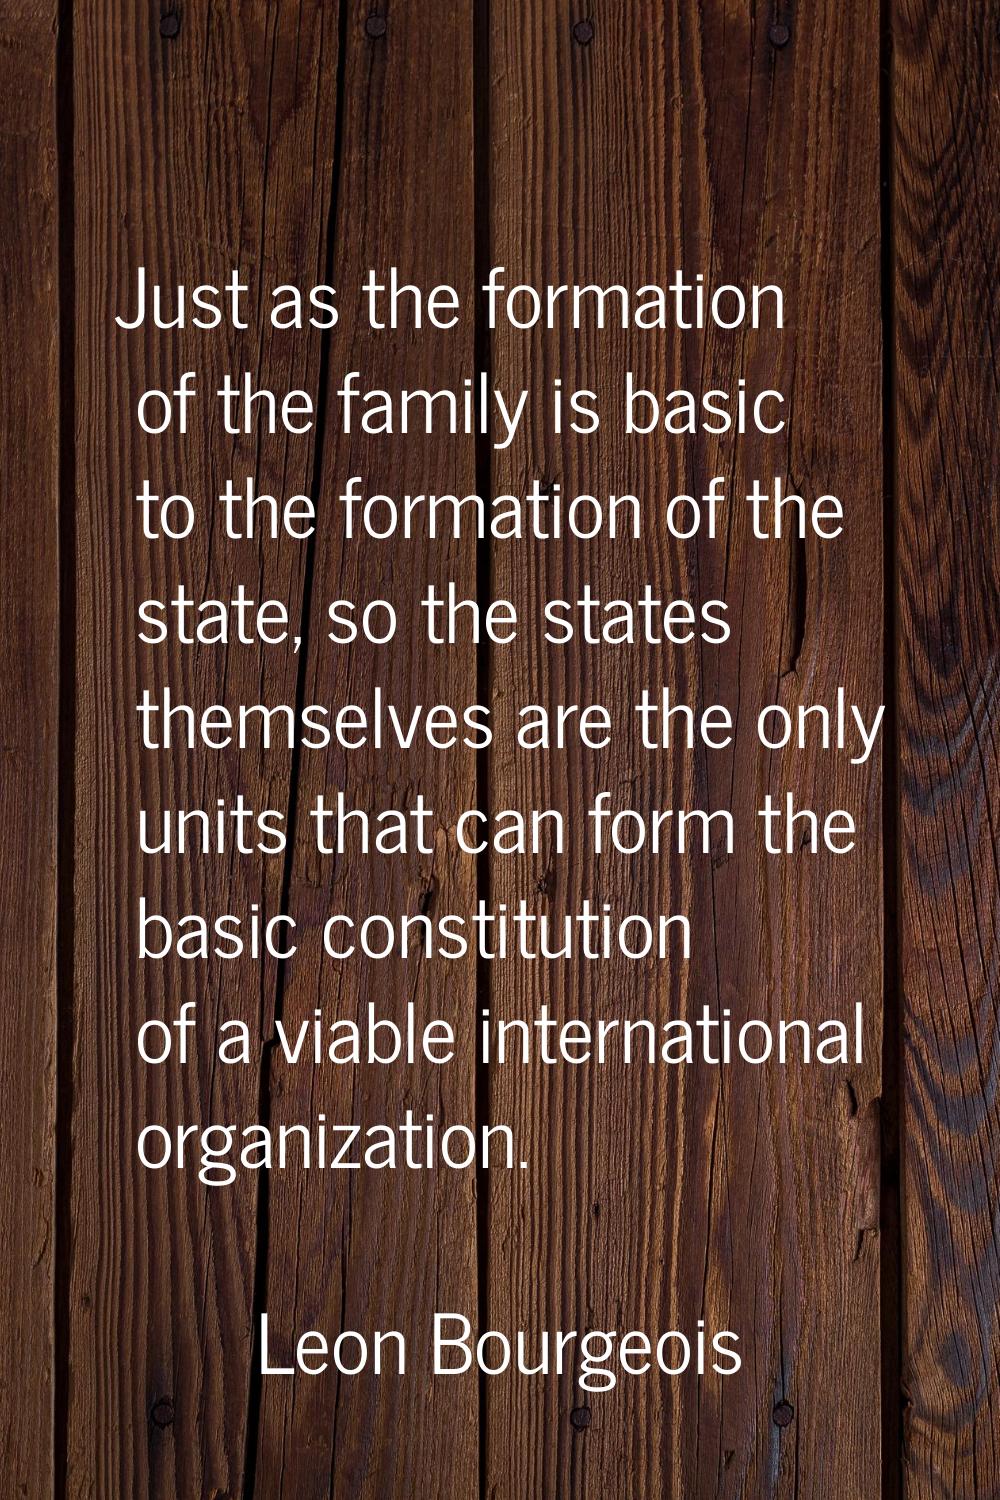 Just as the formation of the family is basic to the formation of the state, so the states themselve